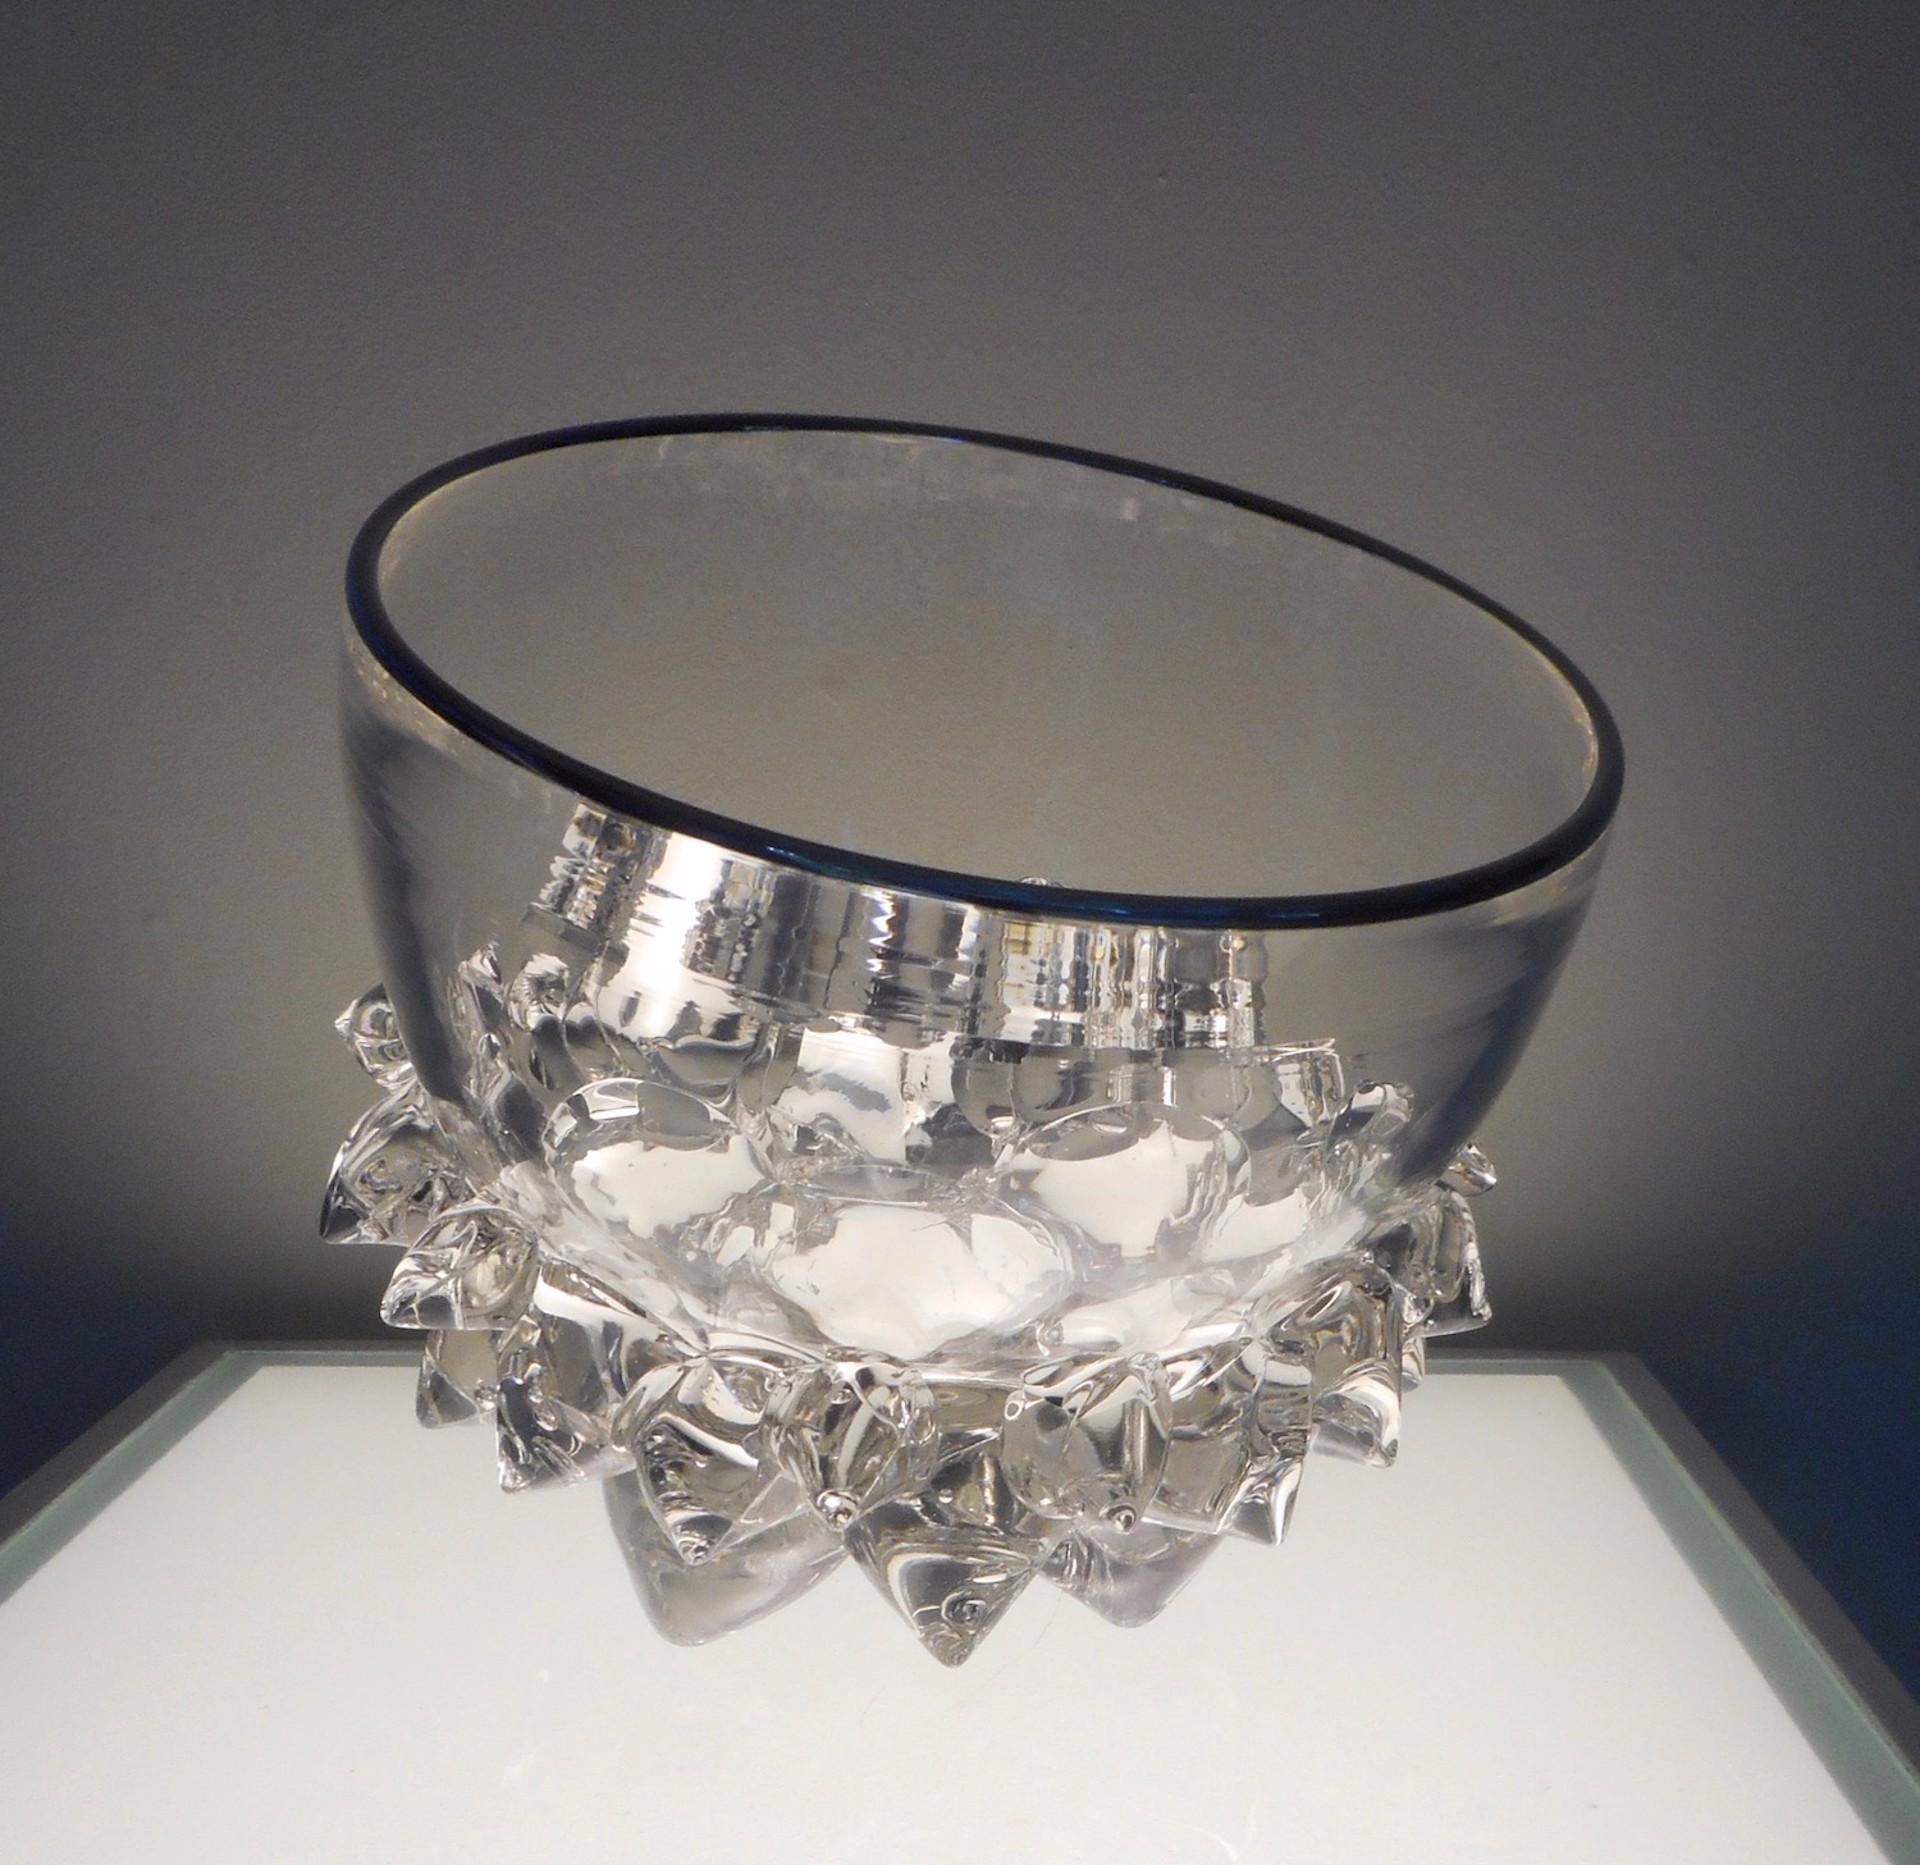 Medium Thorn Vessel VI (Clear/Silver) by Andrew Madvin